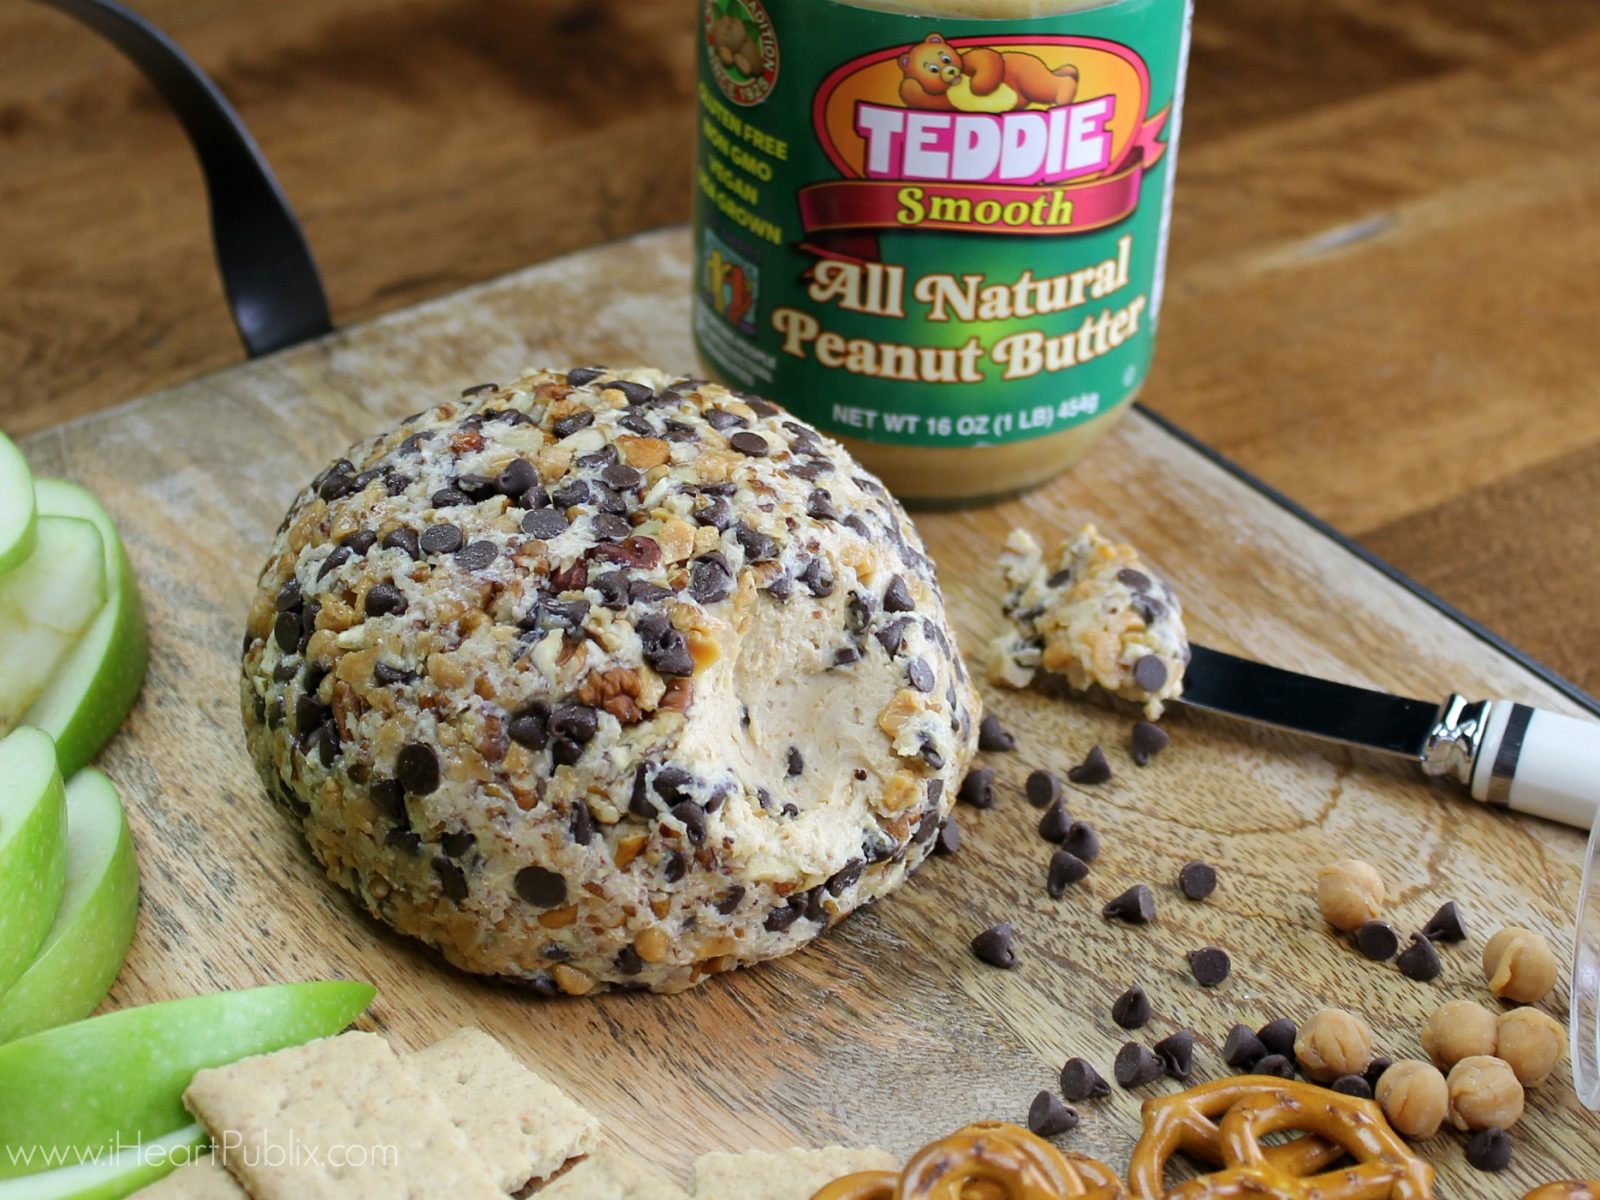 Peanut Butter Turtle Cheese Ball - Easy & Tasty Holiday Treat Made With Teddie All Natural Peanut Butter (Save Now At Publix!) on I Heart Publix 1